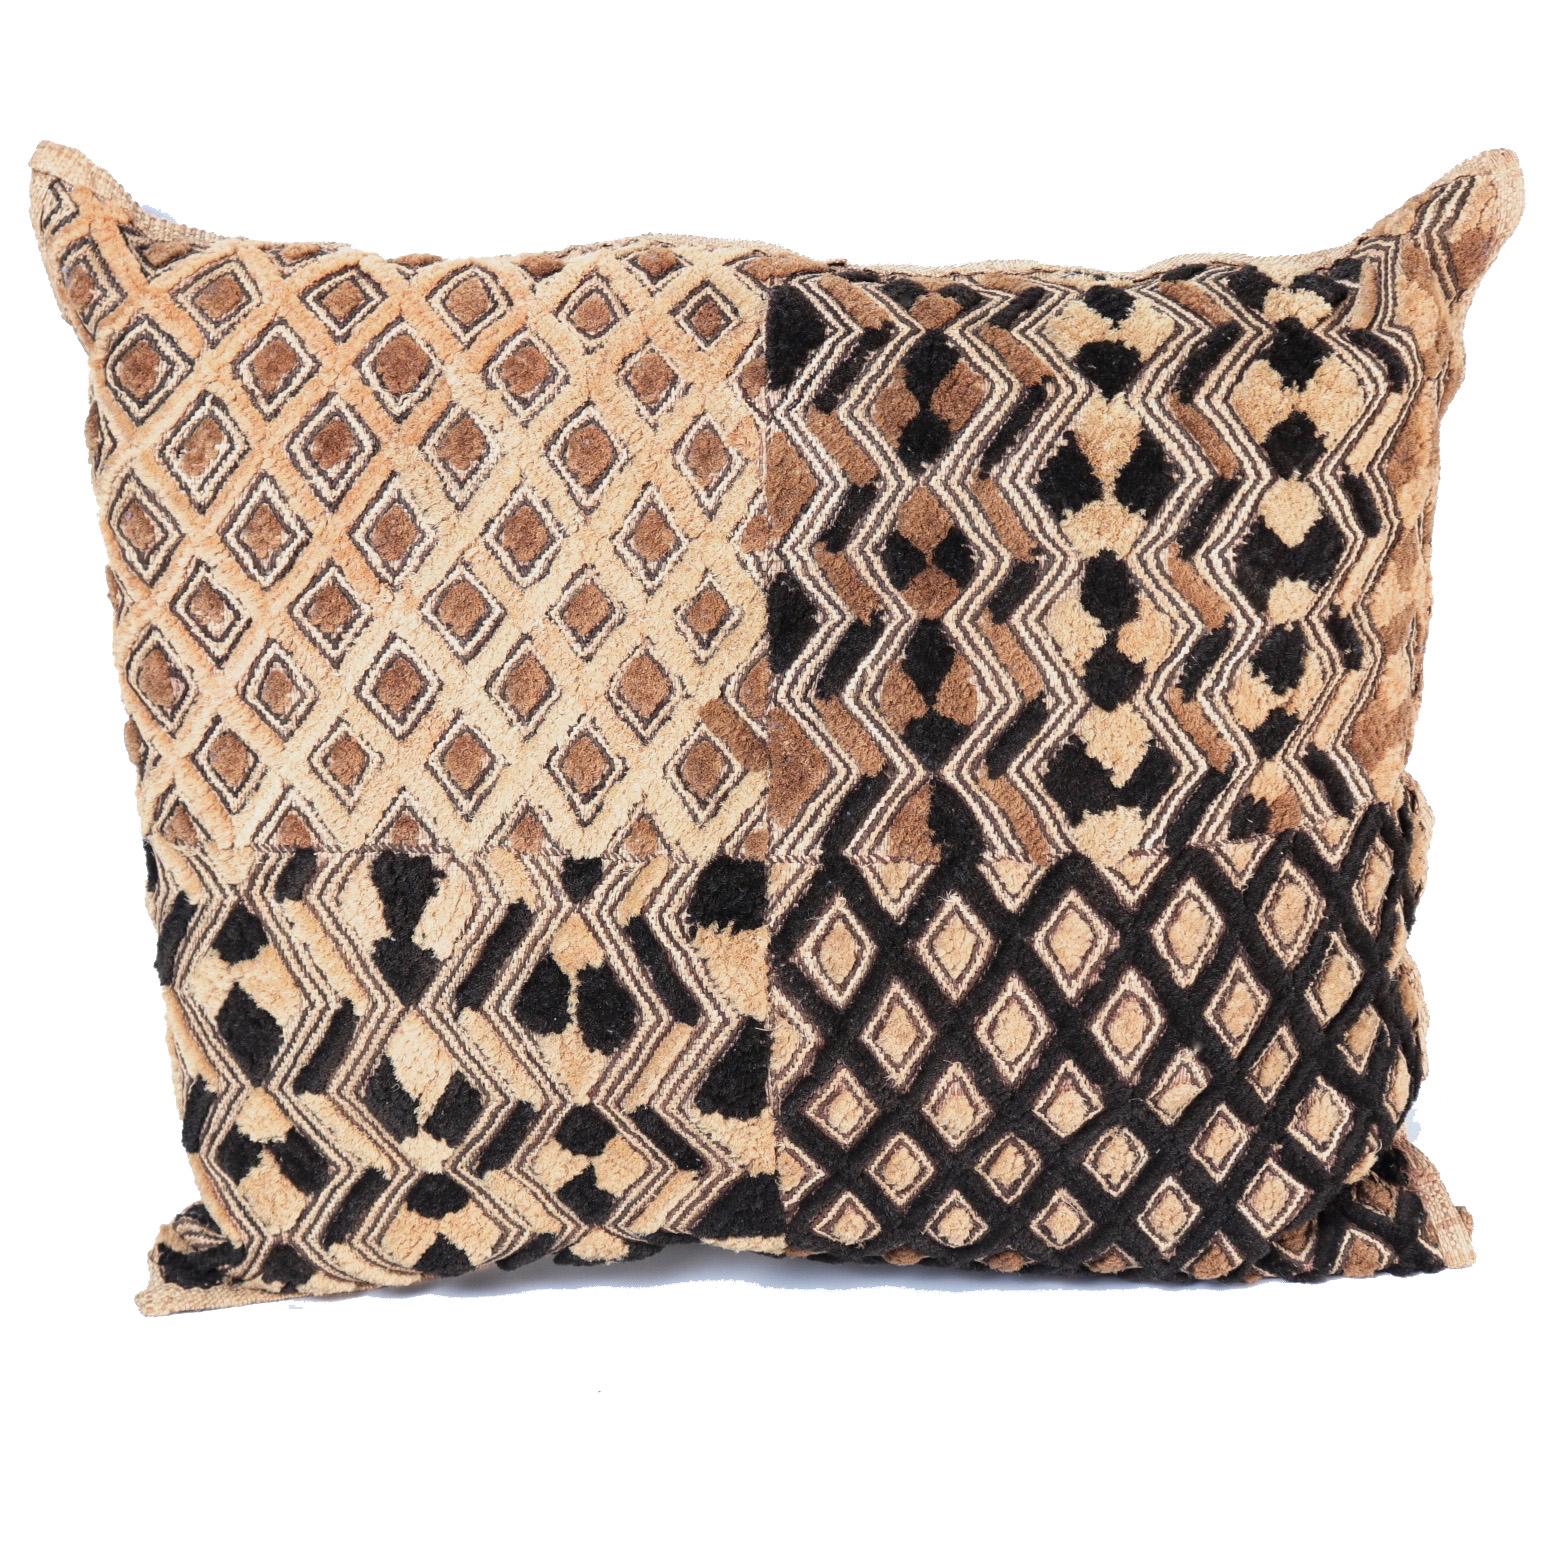 Kuba Shoowa pillow, crafted from a raffia pile cut cloth from the Kuba people. Traditionally this type of cloth was valued in the community and would serve as a type of currency. The patterns are unique to each creation such as this one, divided